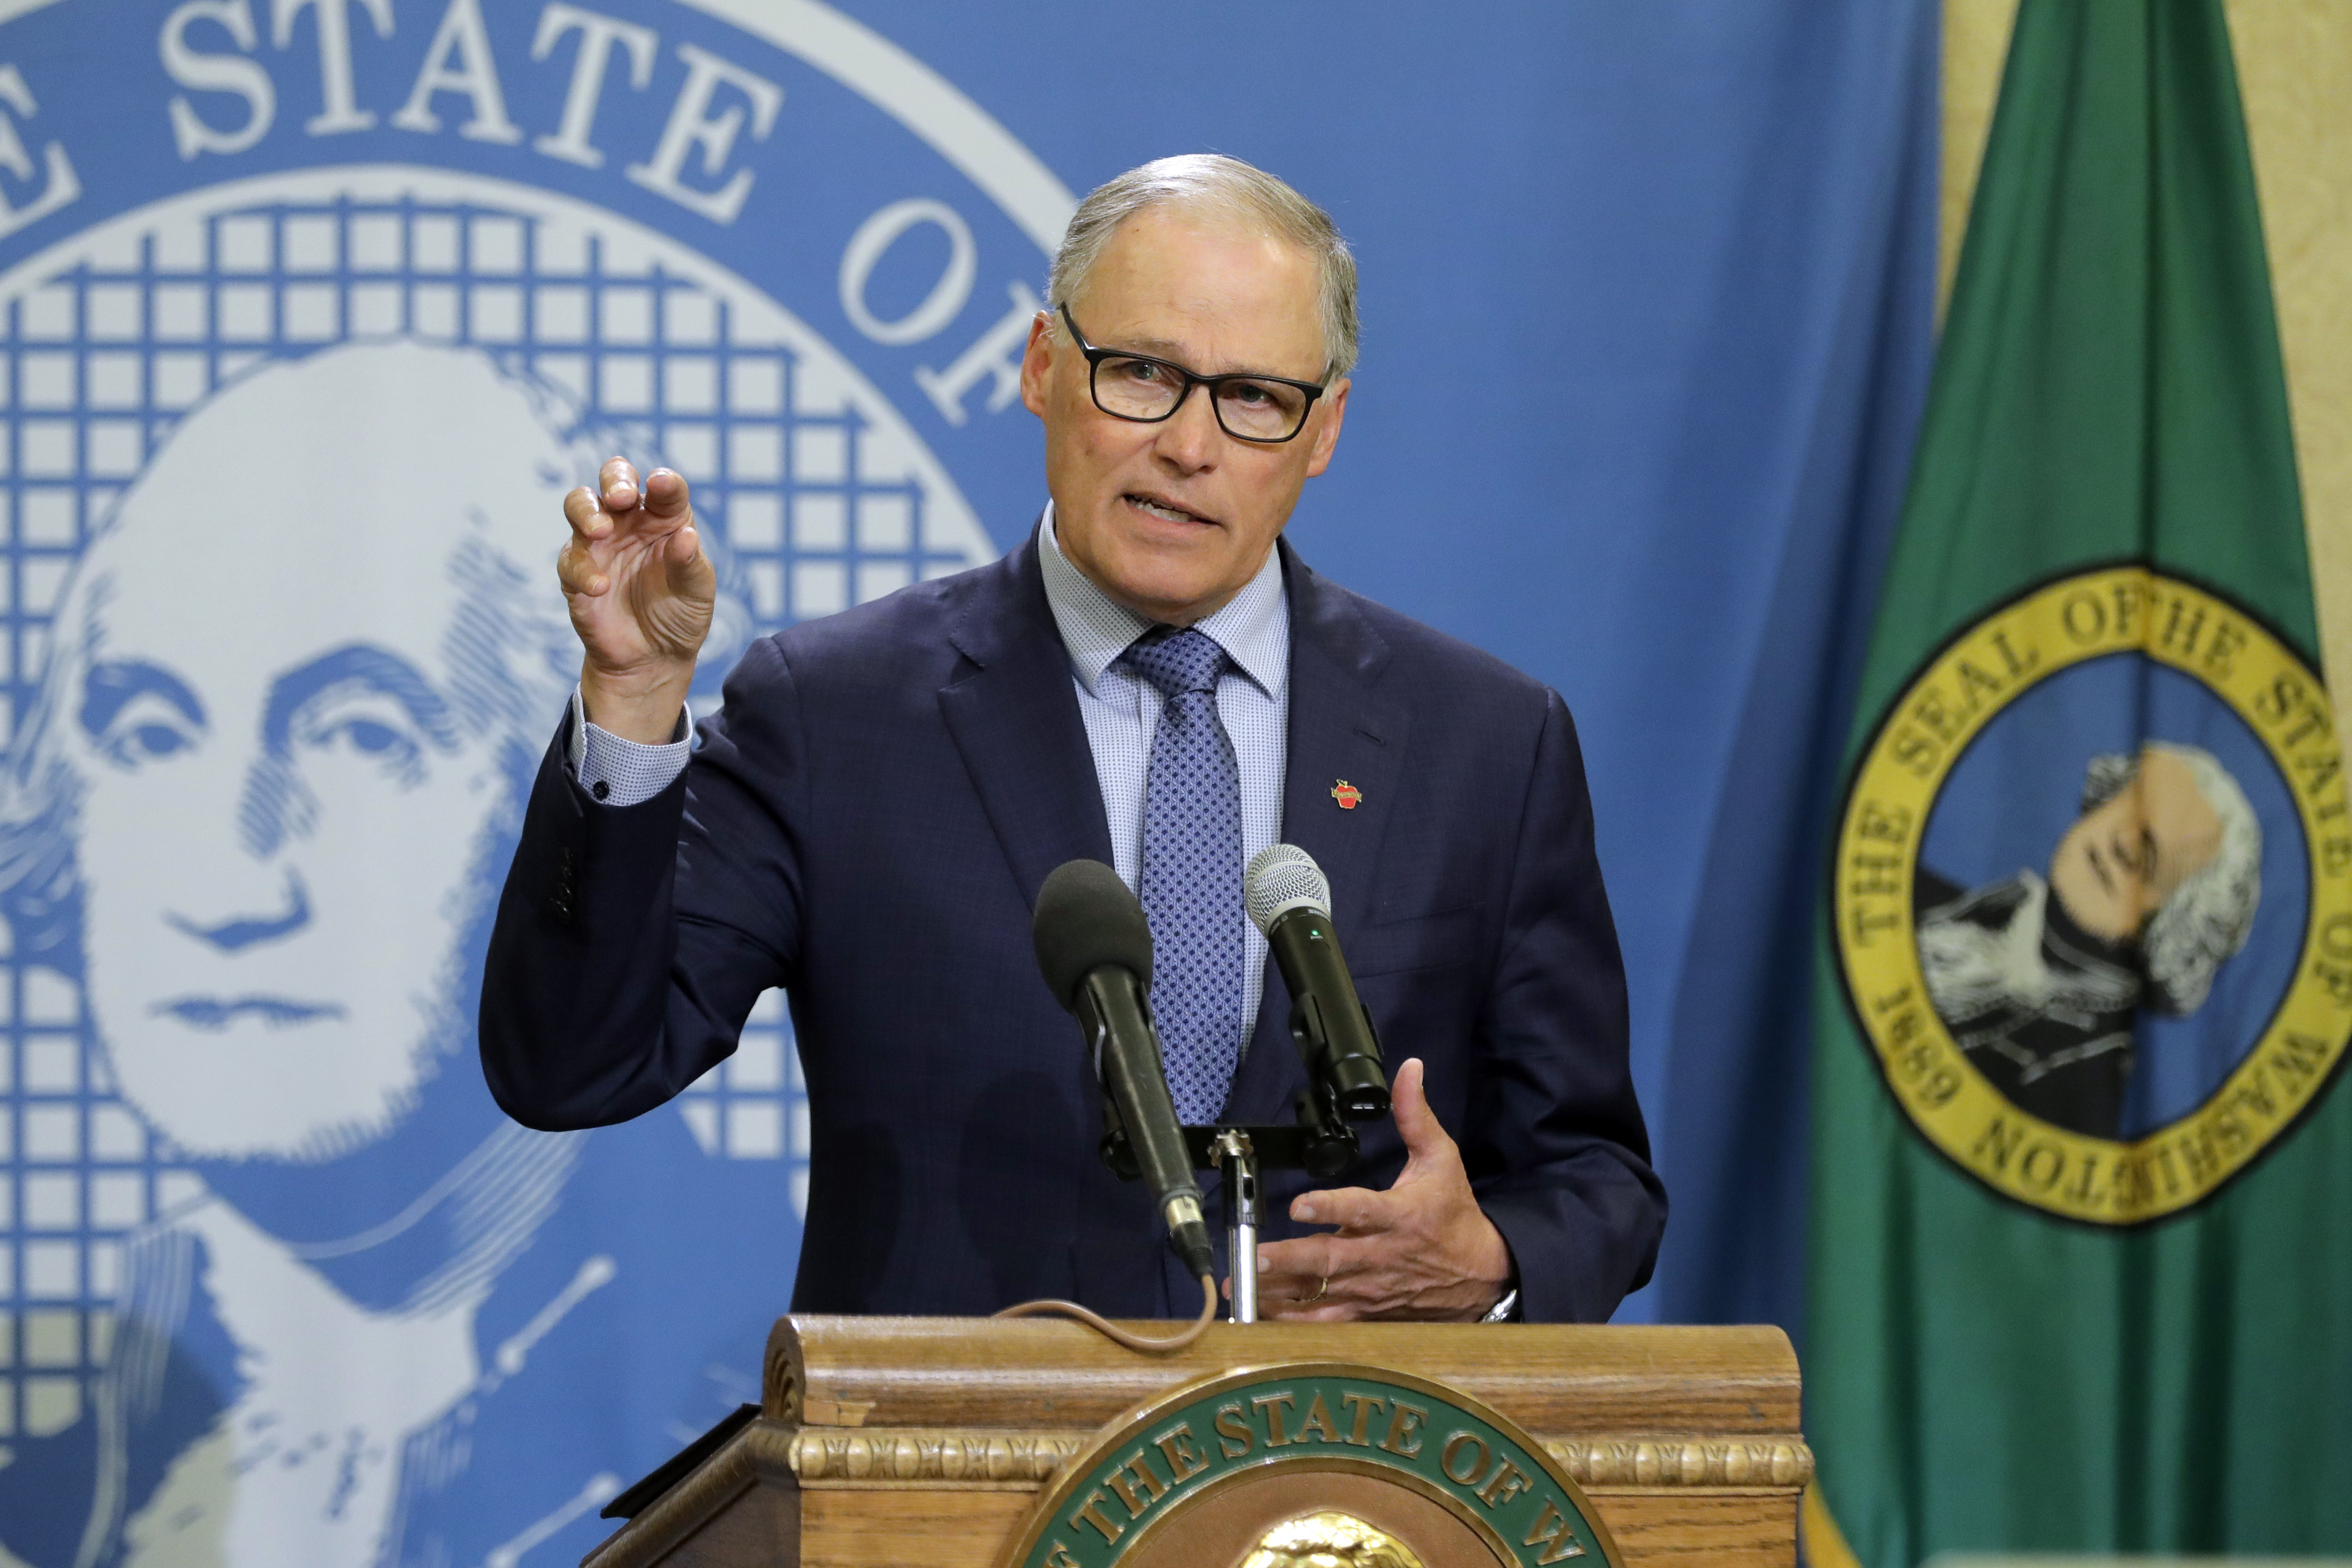 Washington Gov. Jay Inslee speaks during a news conference at the Capitol in Olympia, Washington, on April 13.